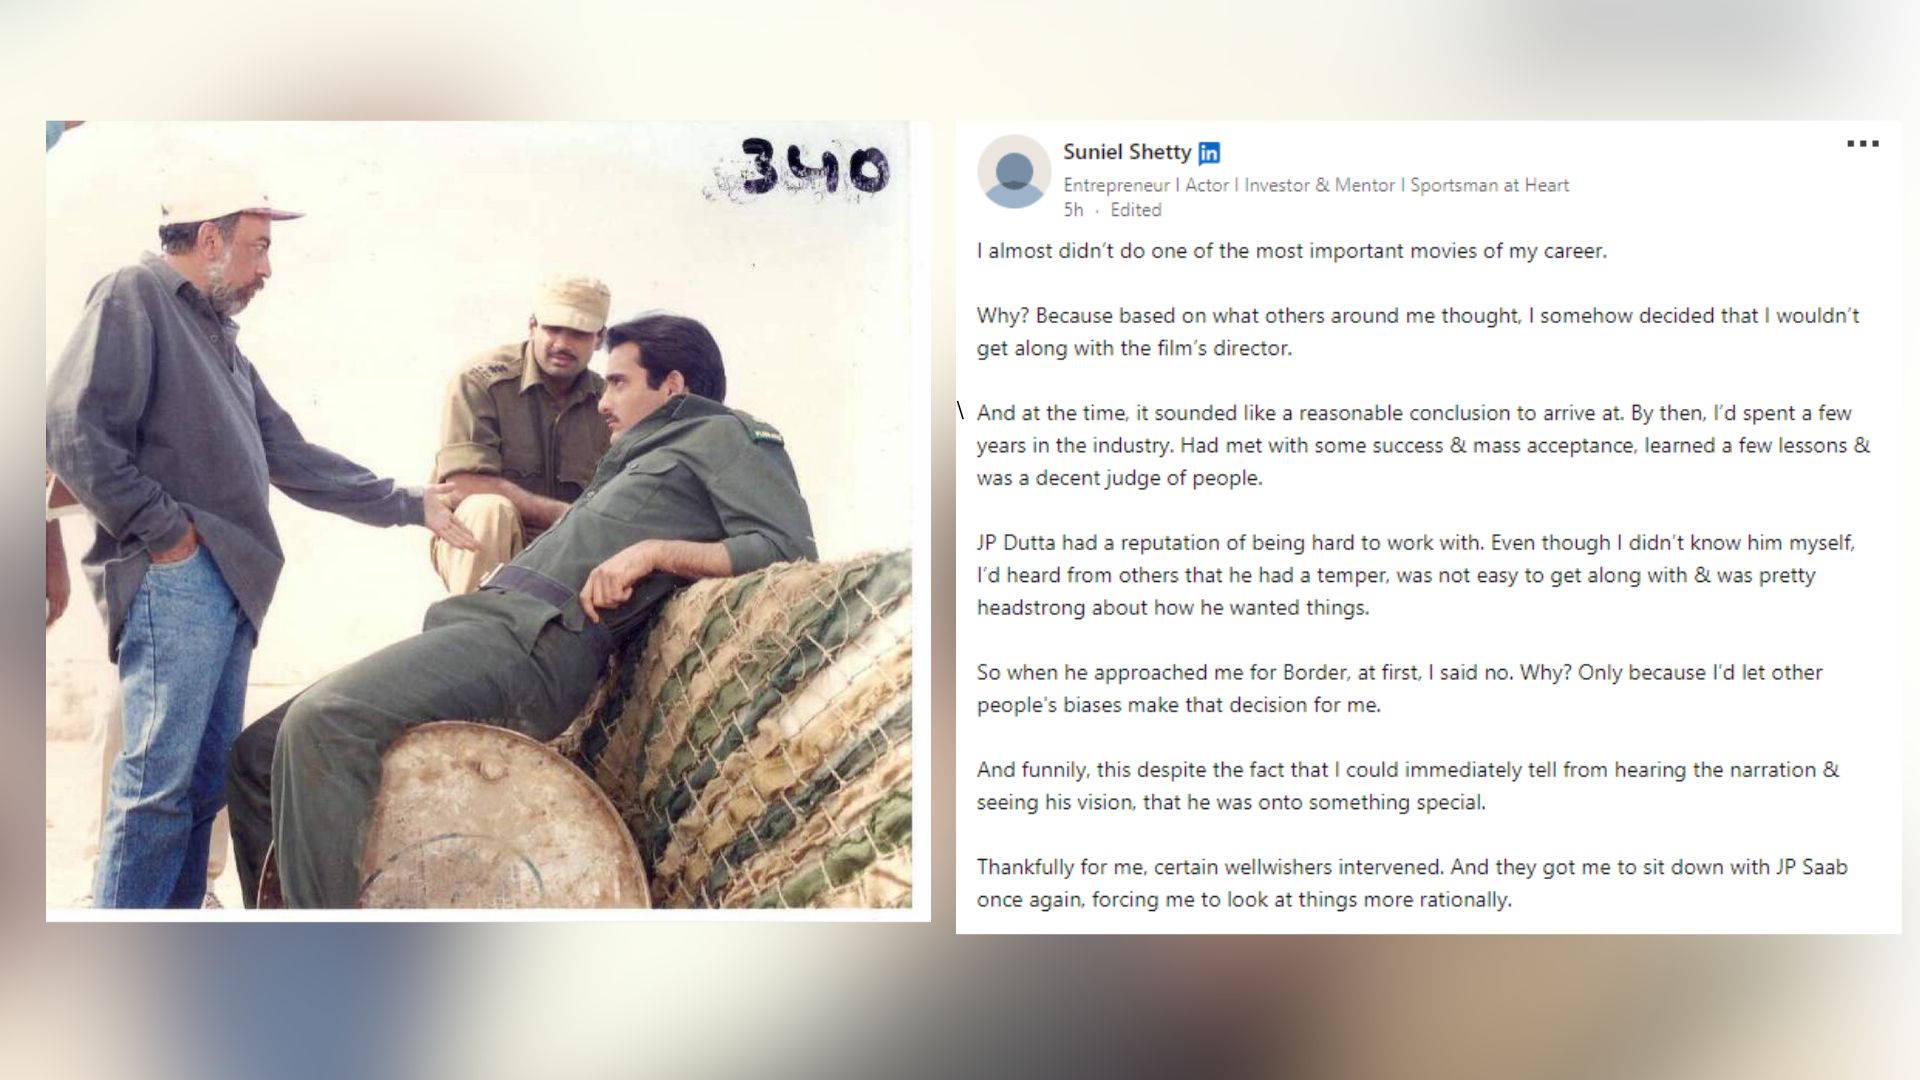 Suniel Shetty Reveals Close Call with Iconic Role in “Border” in LinkedIn Post